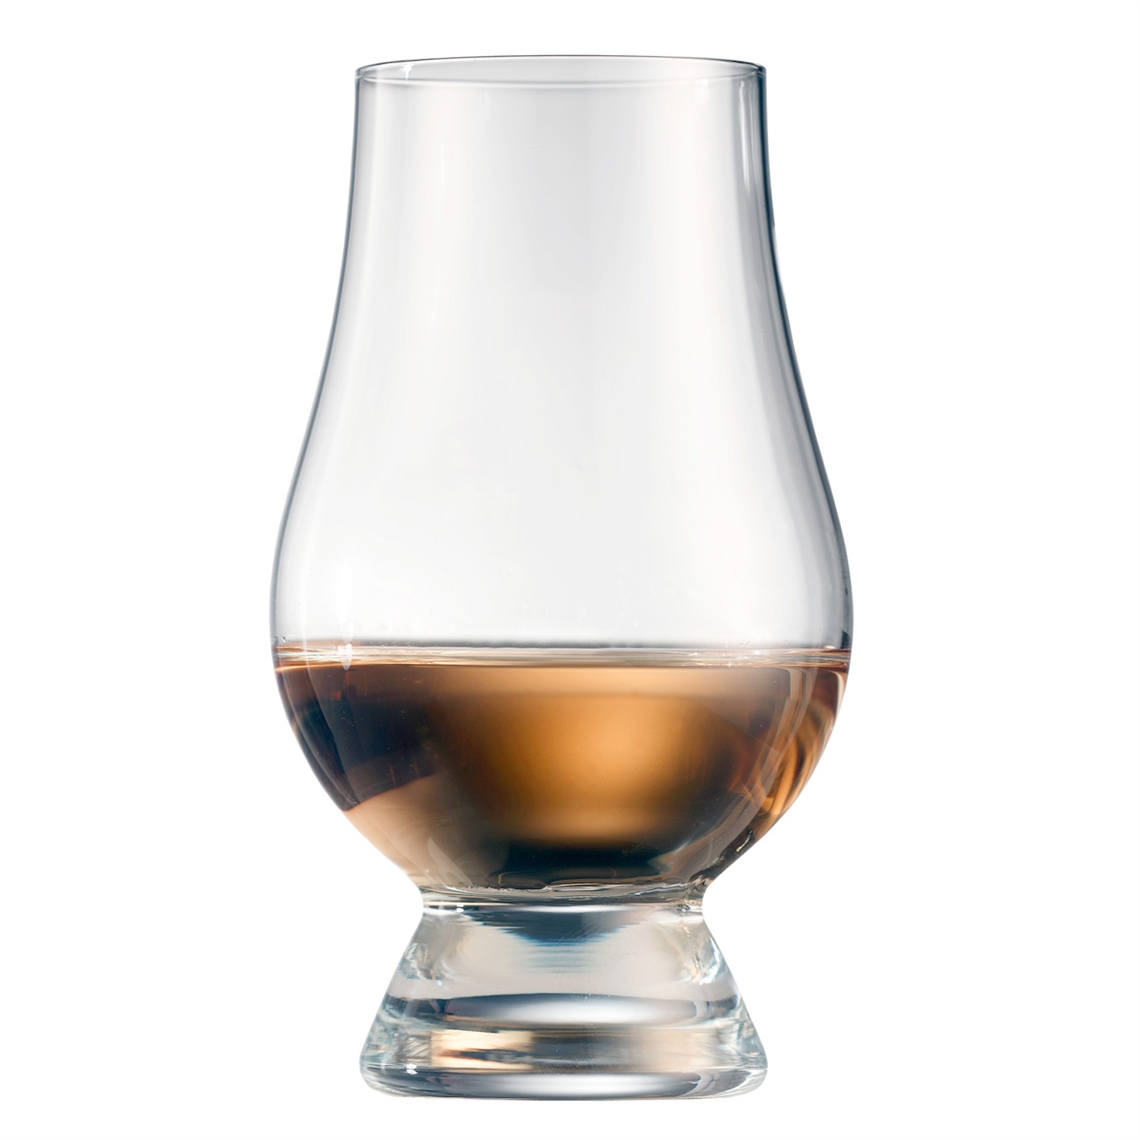 View more glass hire from our Whisky Glasses range